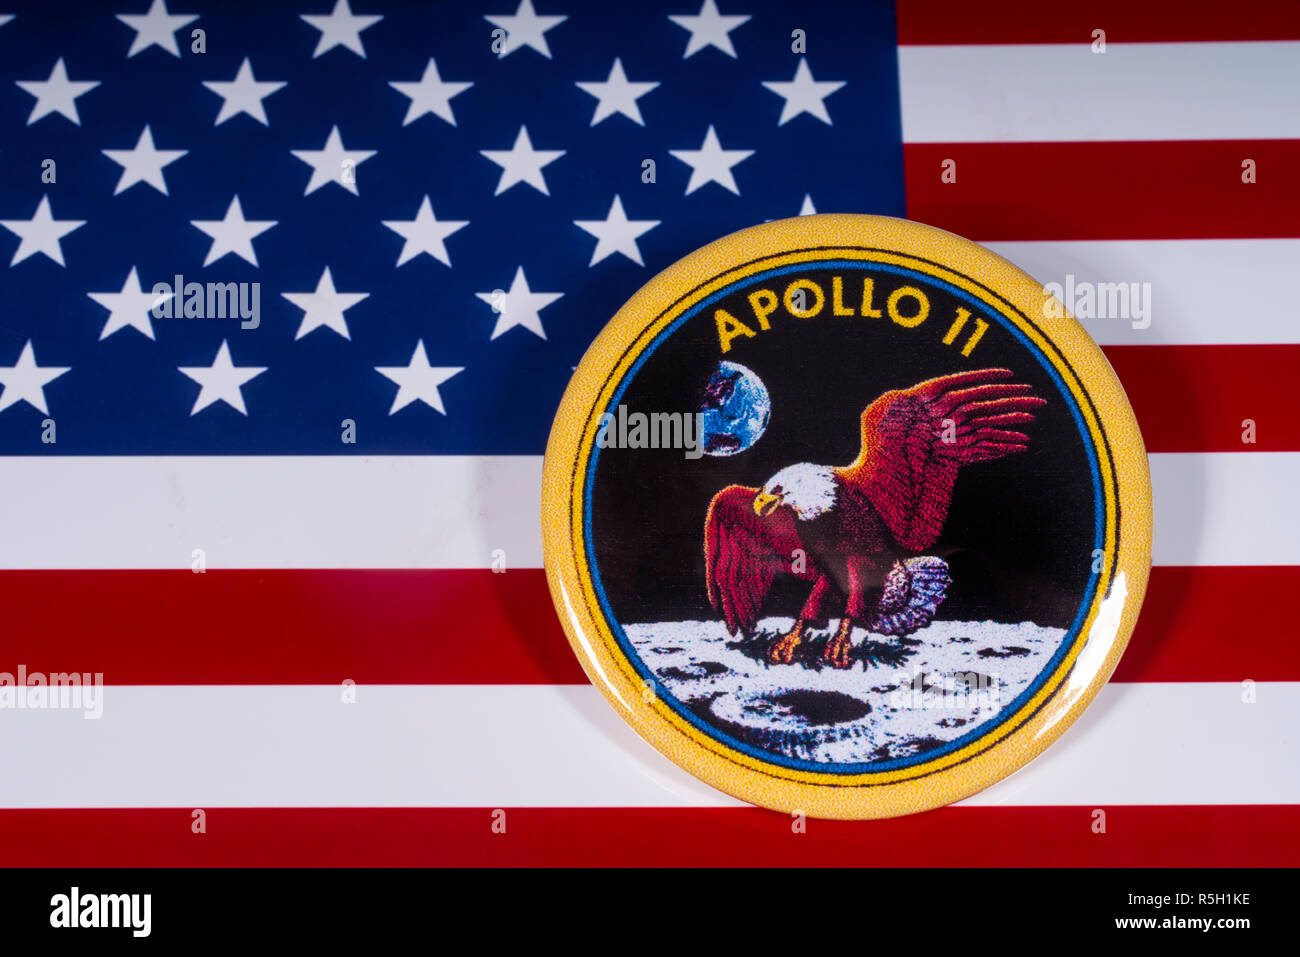 London, UK - November 15th 2018: The badge of the historic Apollo 11 moon landing, pictured over the flag of the United States of America. Stock Photo